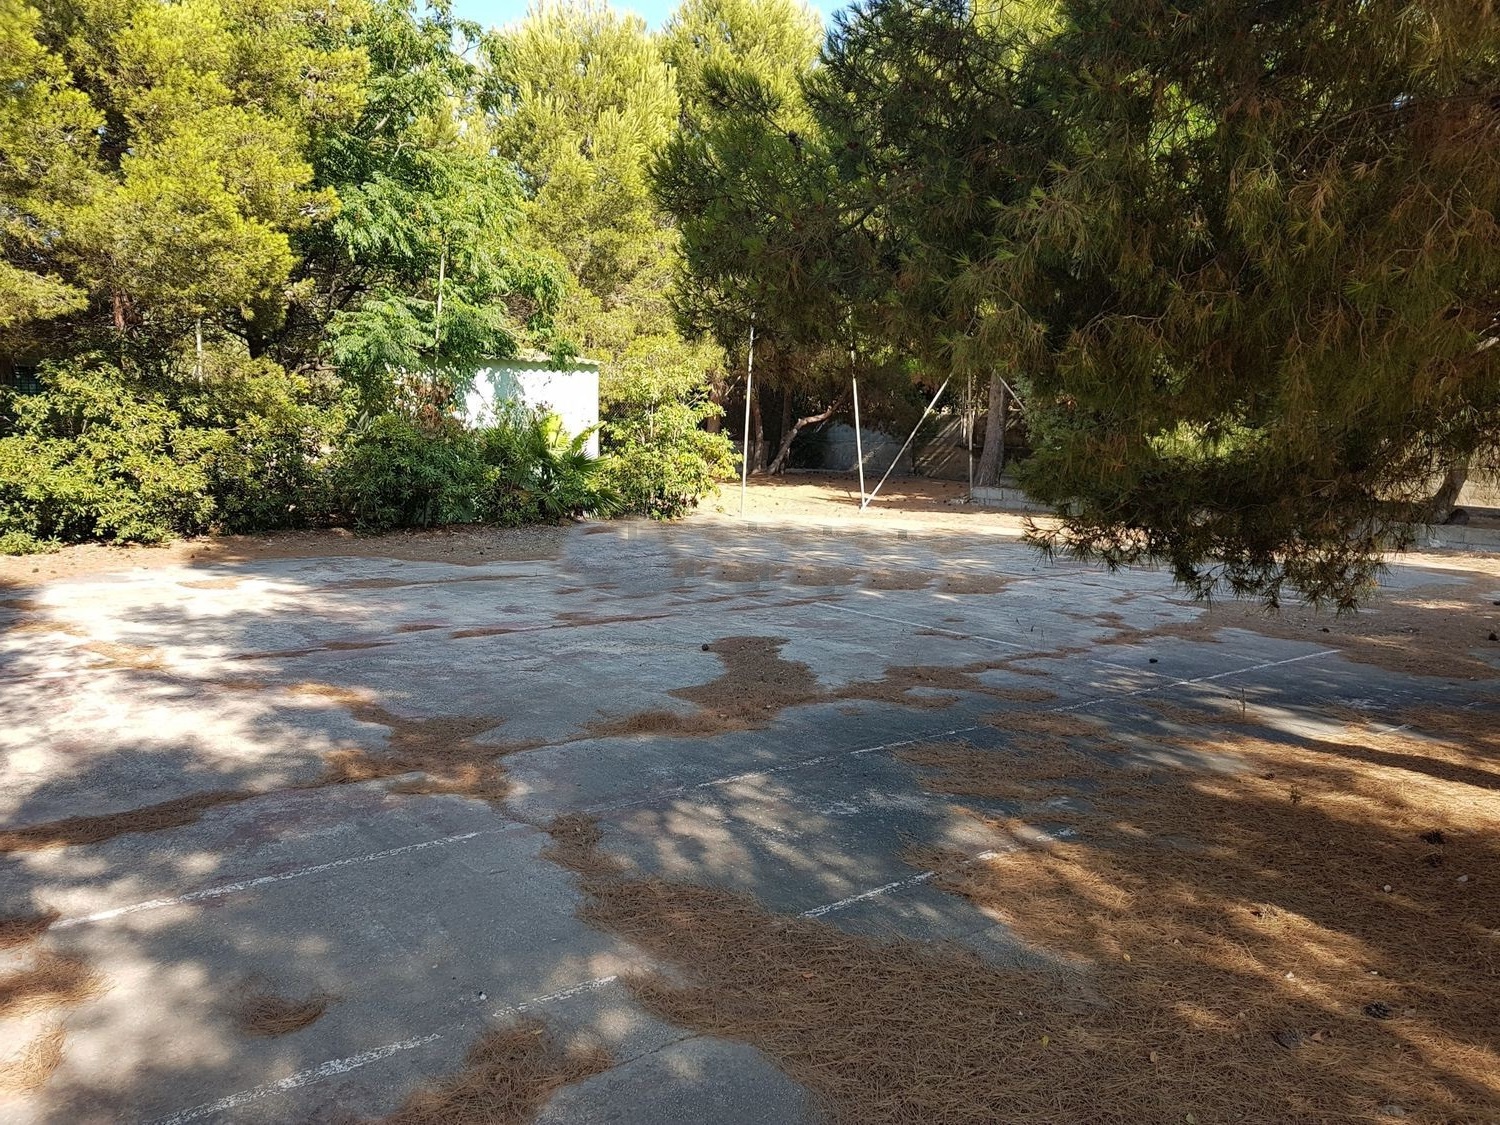 Rural property for sale in Dénia